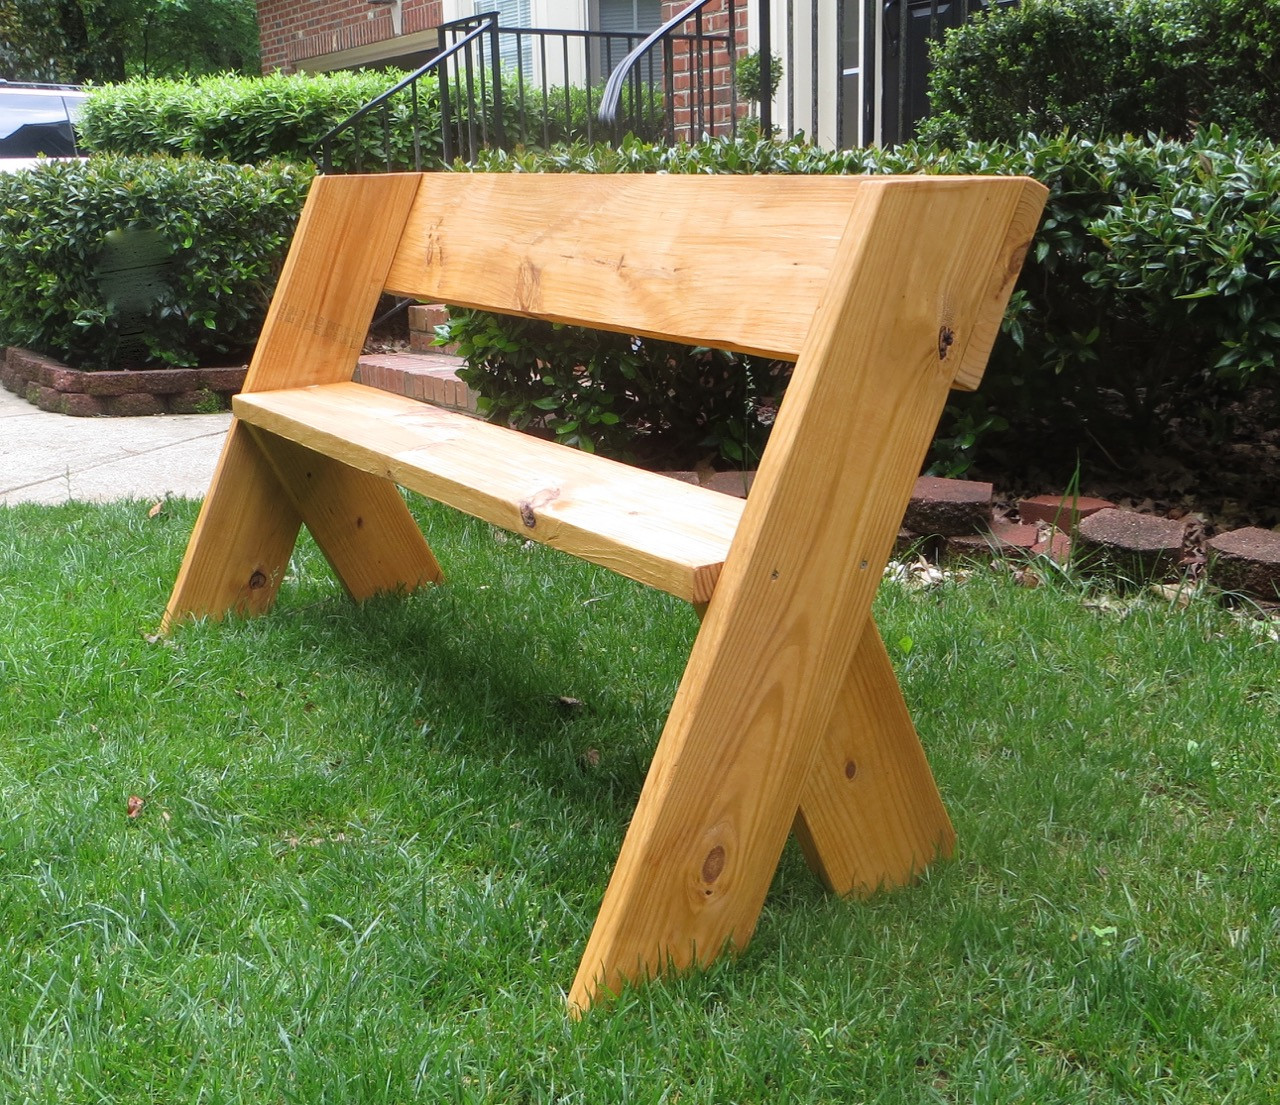 DIY Outdoor Wood Bench
 The Project Lady DIY Tutorial $16 Simple Outdoor Wood Bench